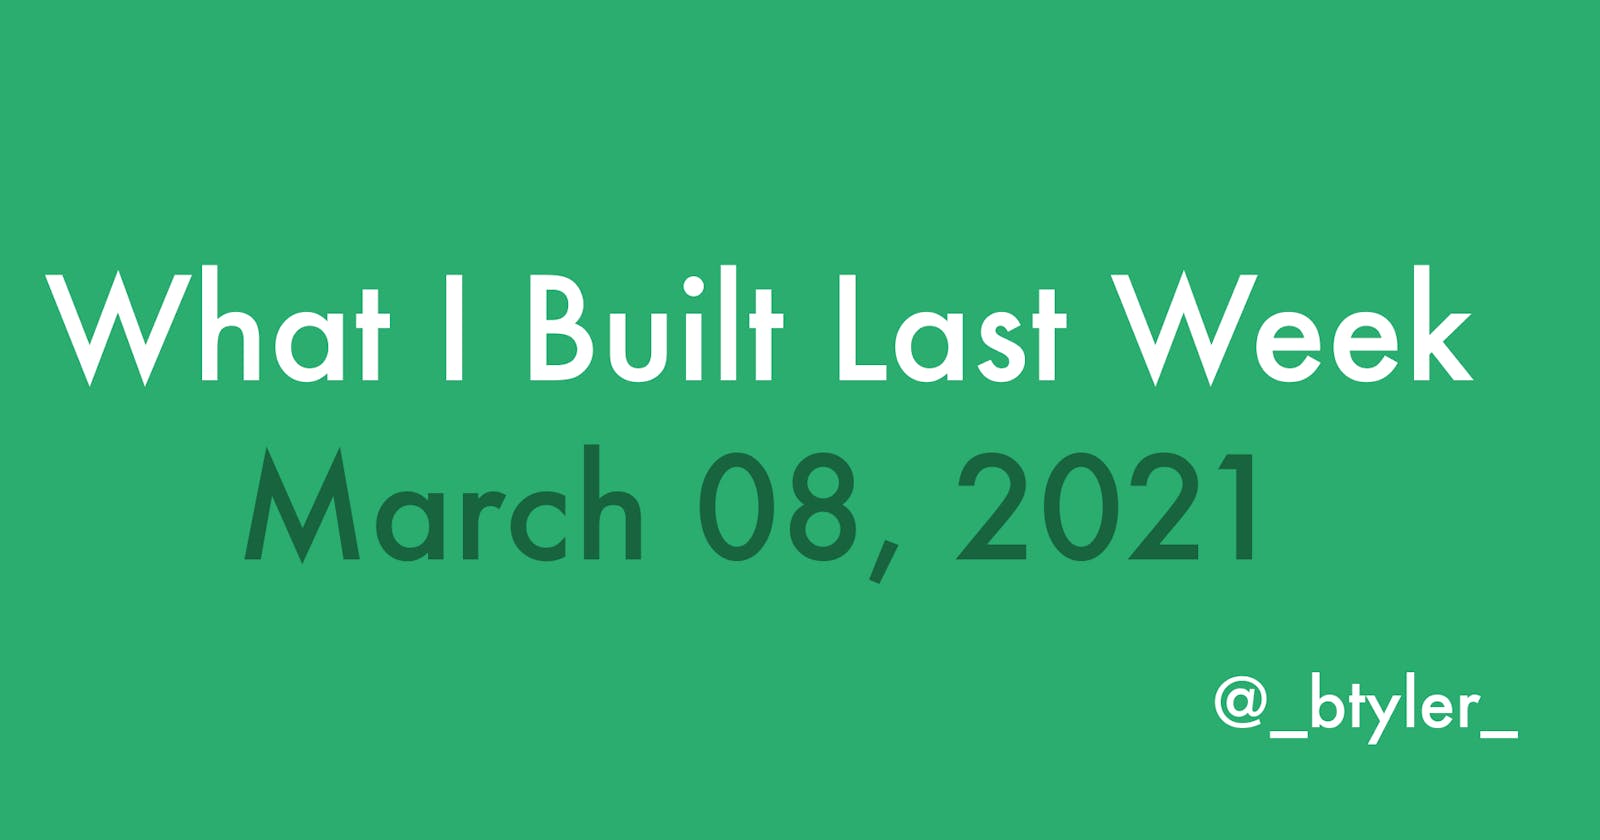 What I Built Last Week - March 08, 2021